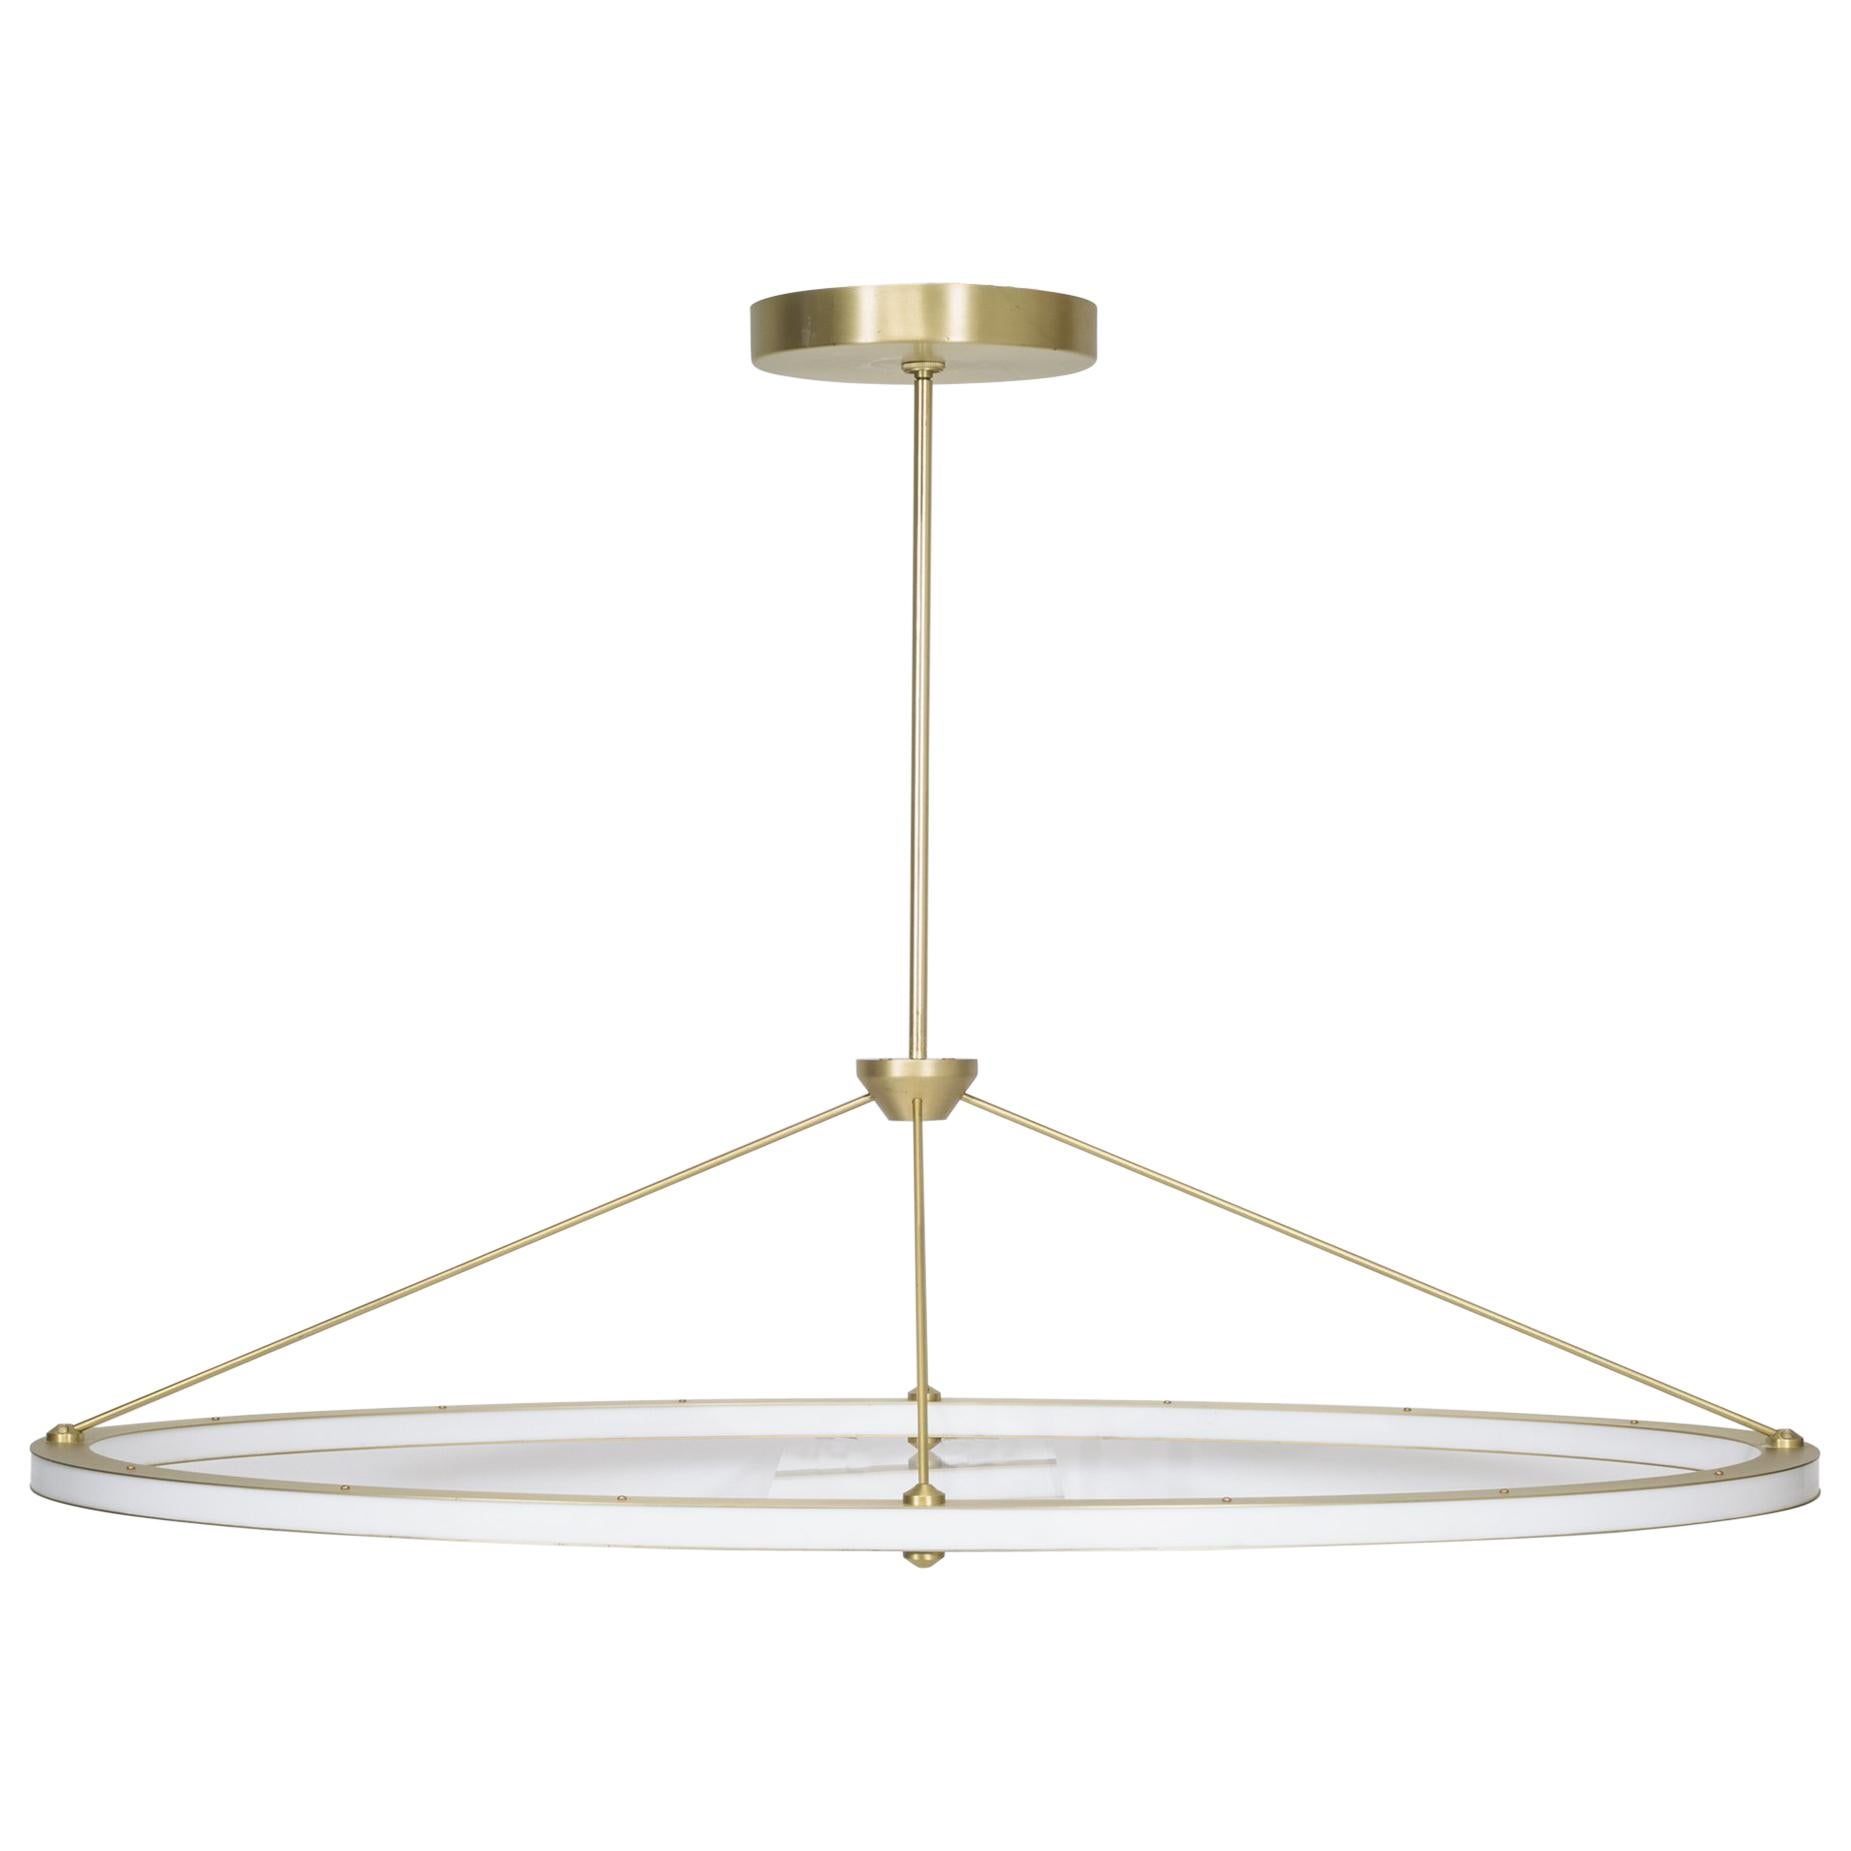 Halo Oval Pendant by Roll & Hill Designed by Paul Loebach